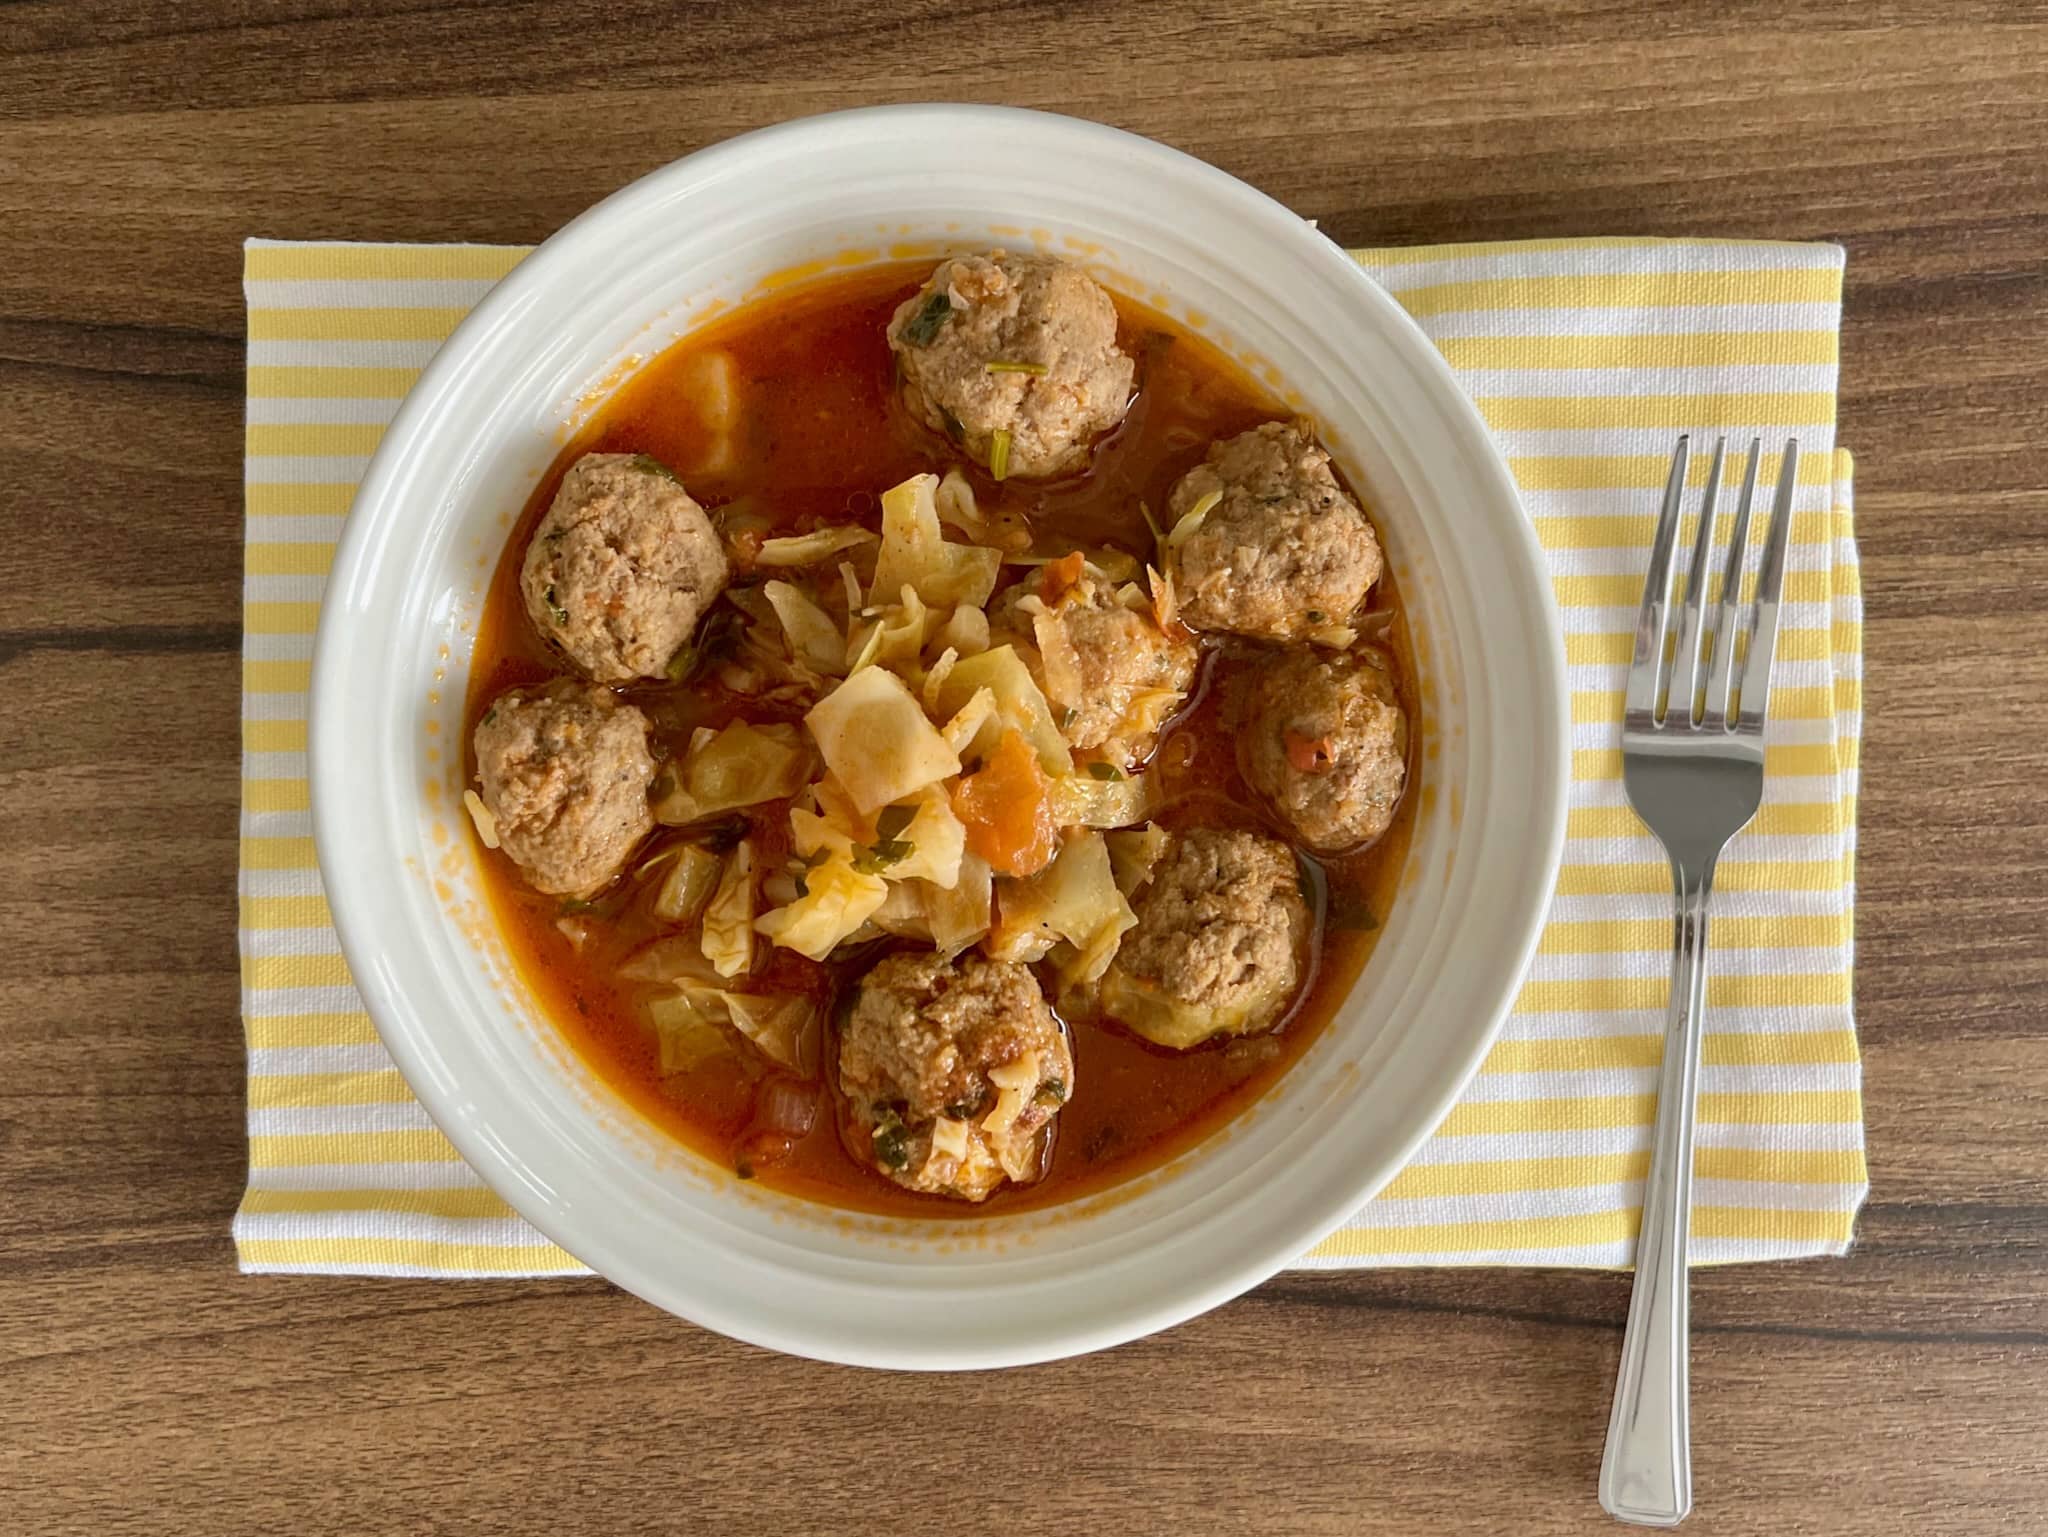 Meatballs with Cabbage served on a plate